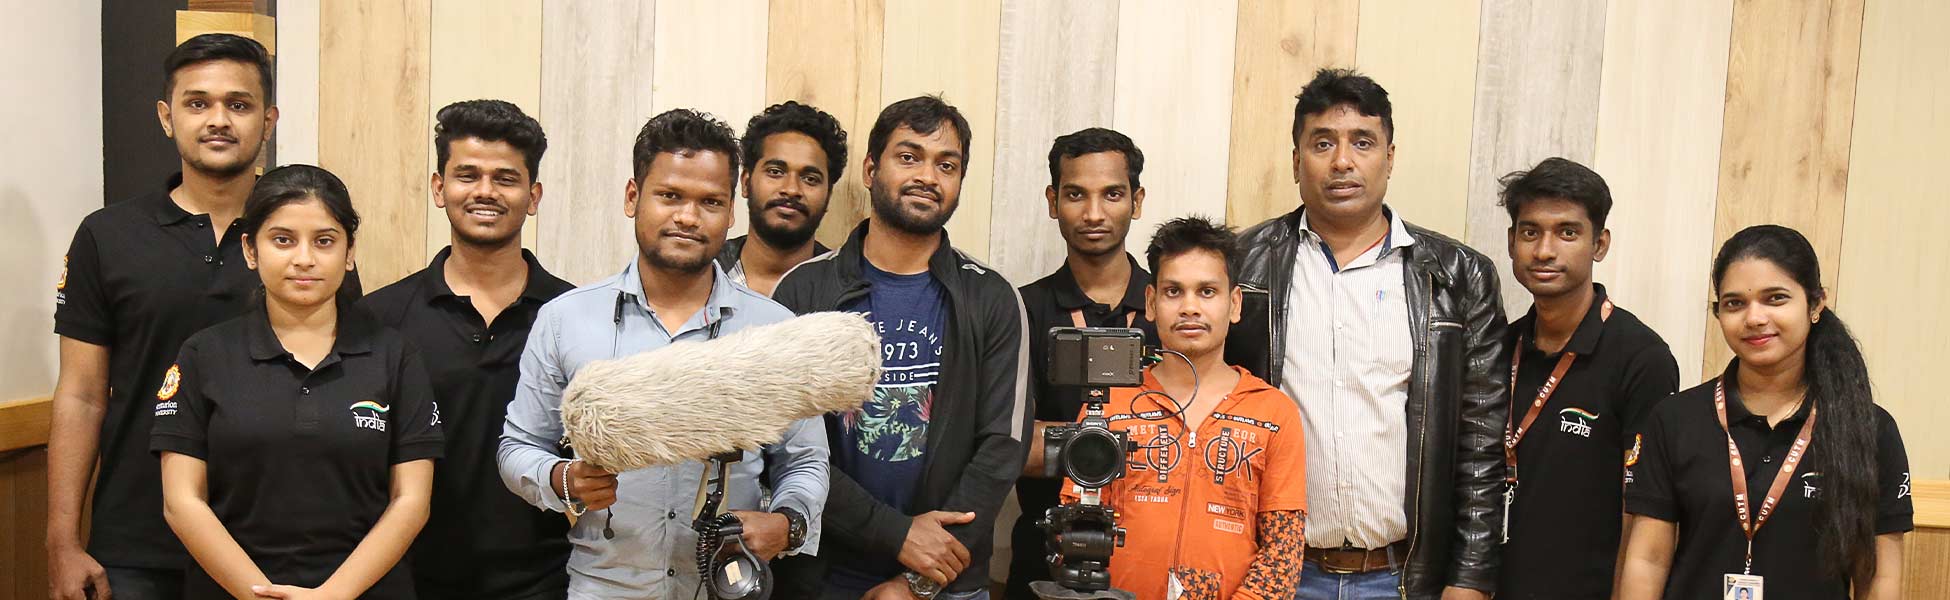 film production services in South 24 Parganas, video production services in South 24 Parganas, tv production services in South 24 Parganas, production services in South 24 Parganas